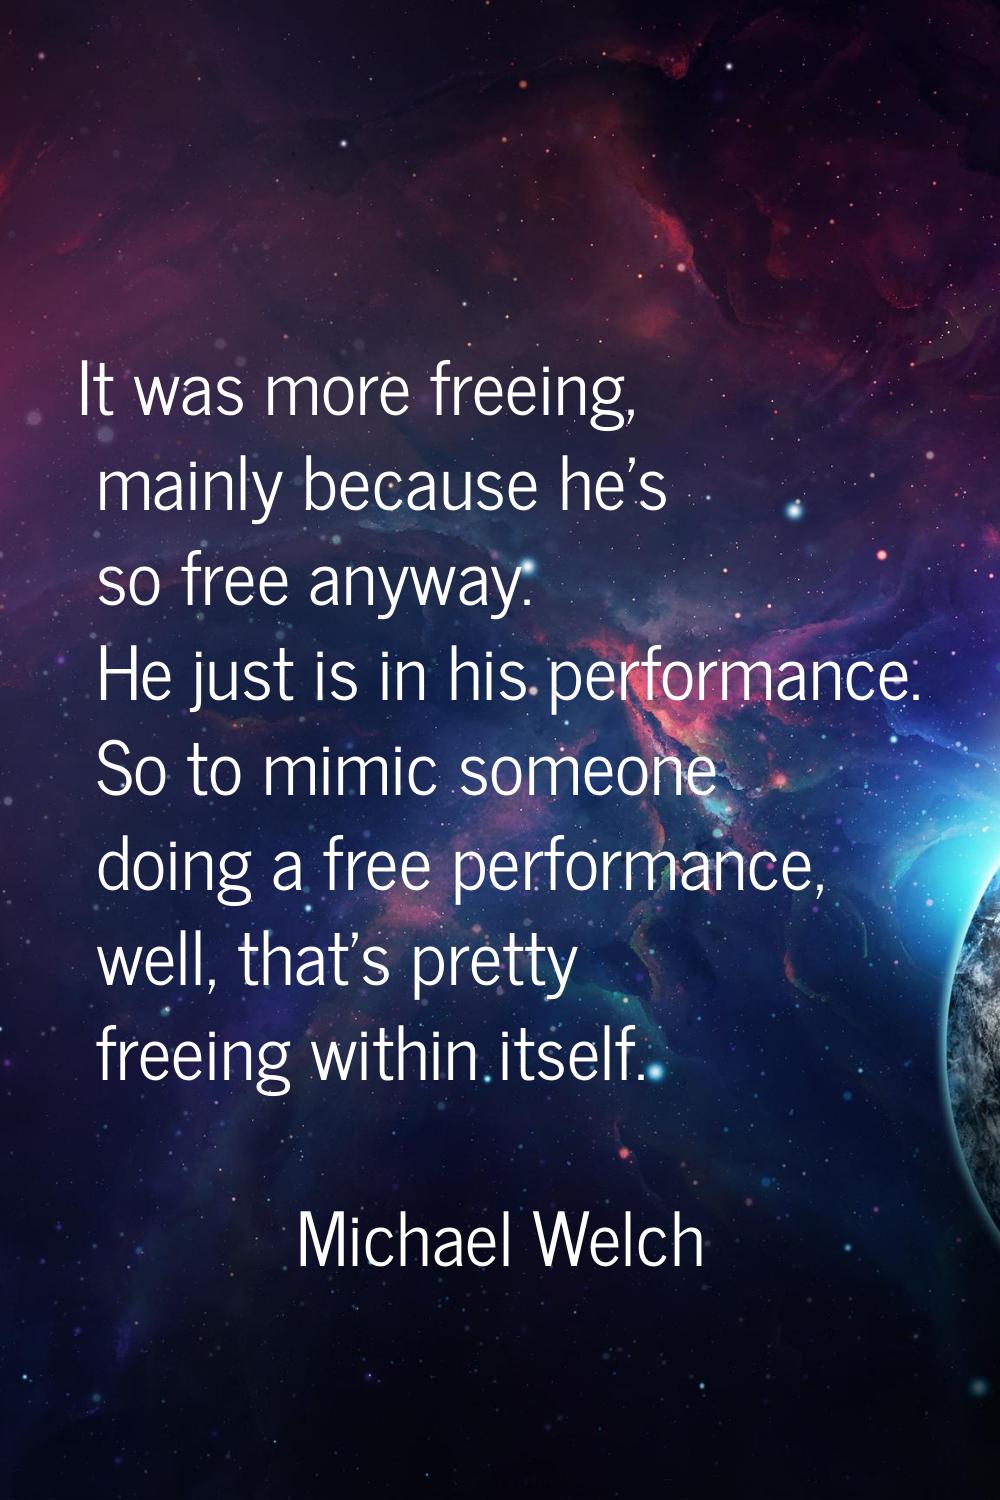 It was more freeing, mainly because he's so free anyway. He just is in his performance. So to mimic